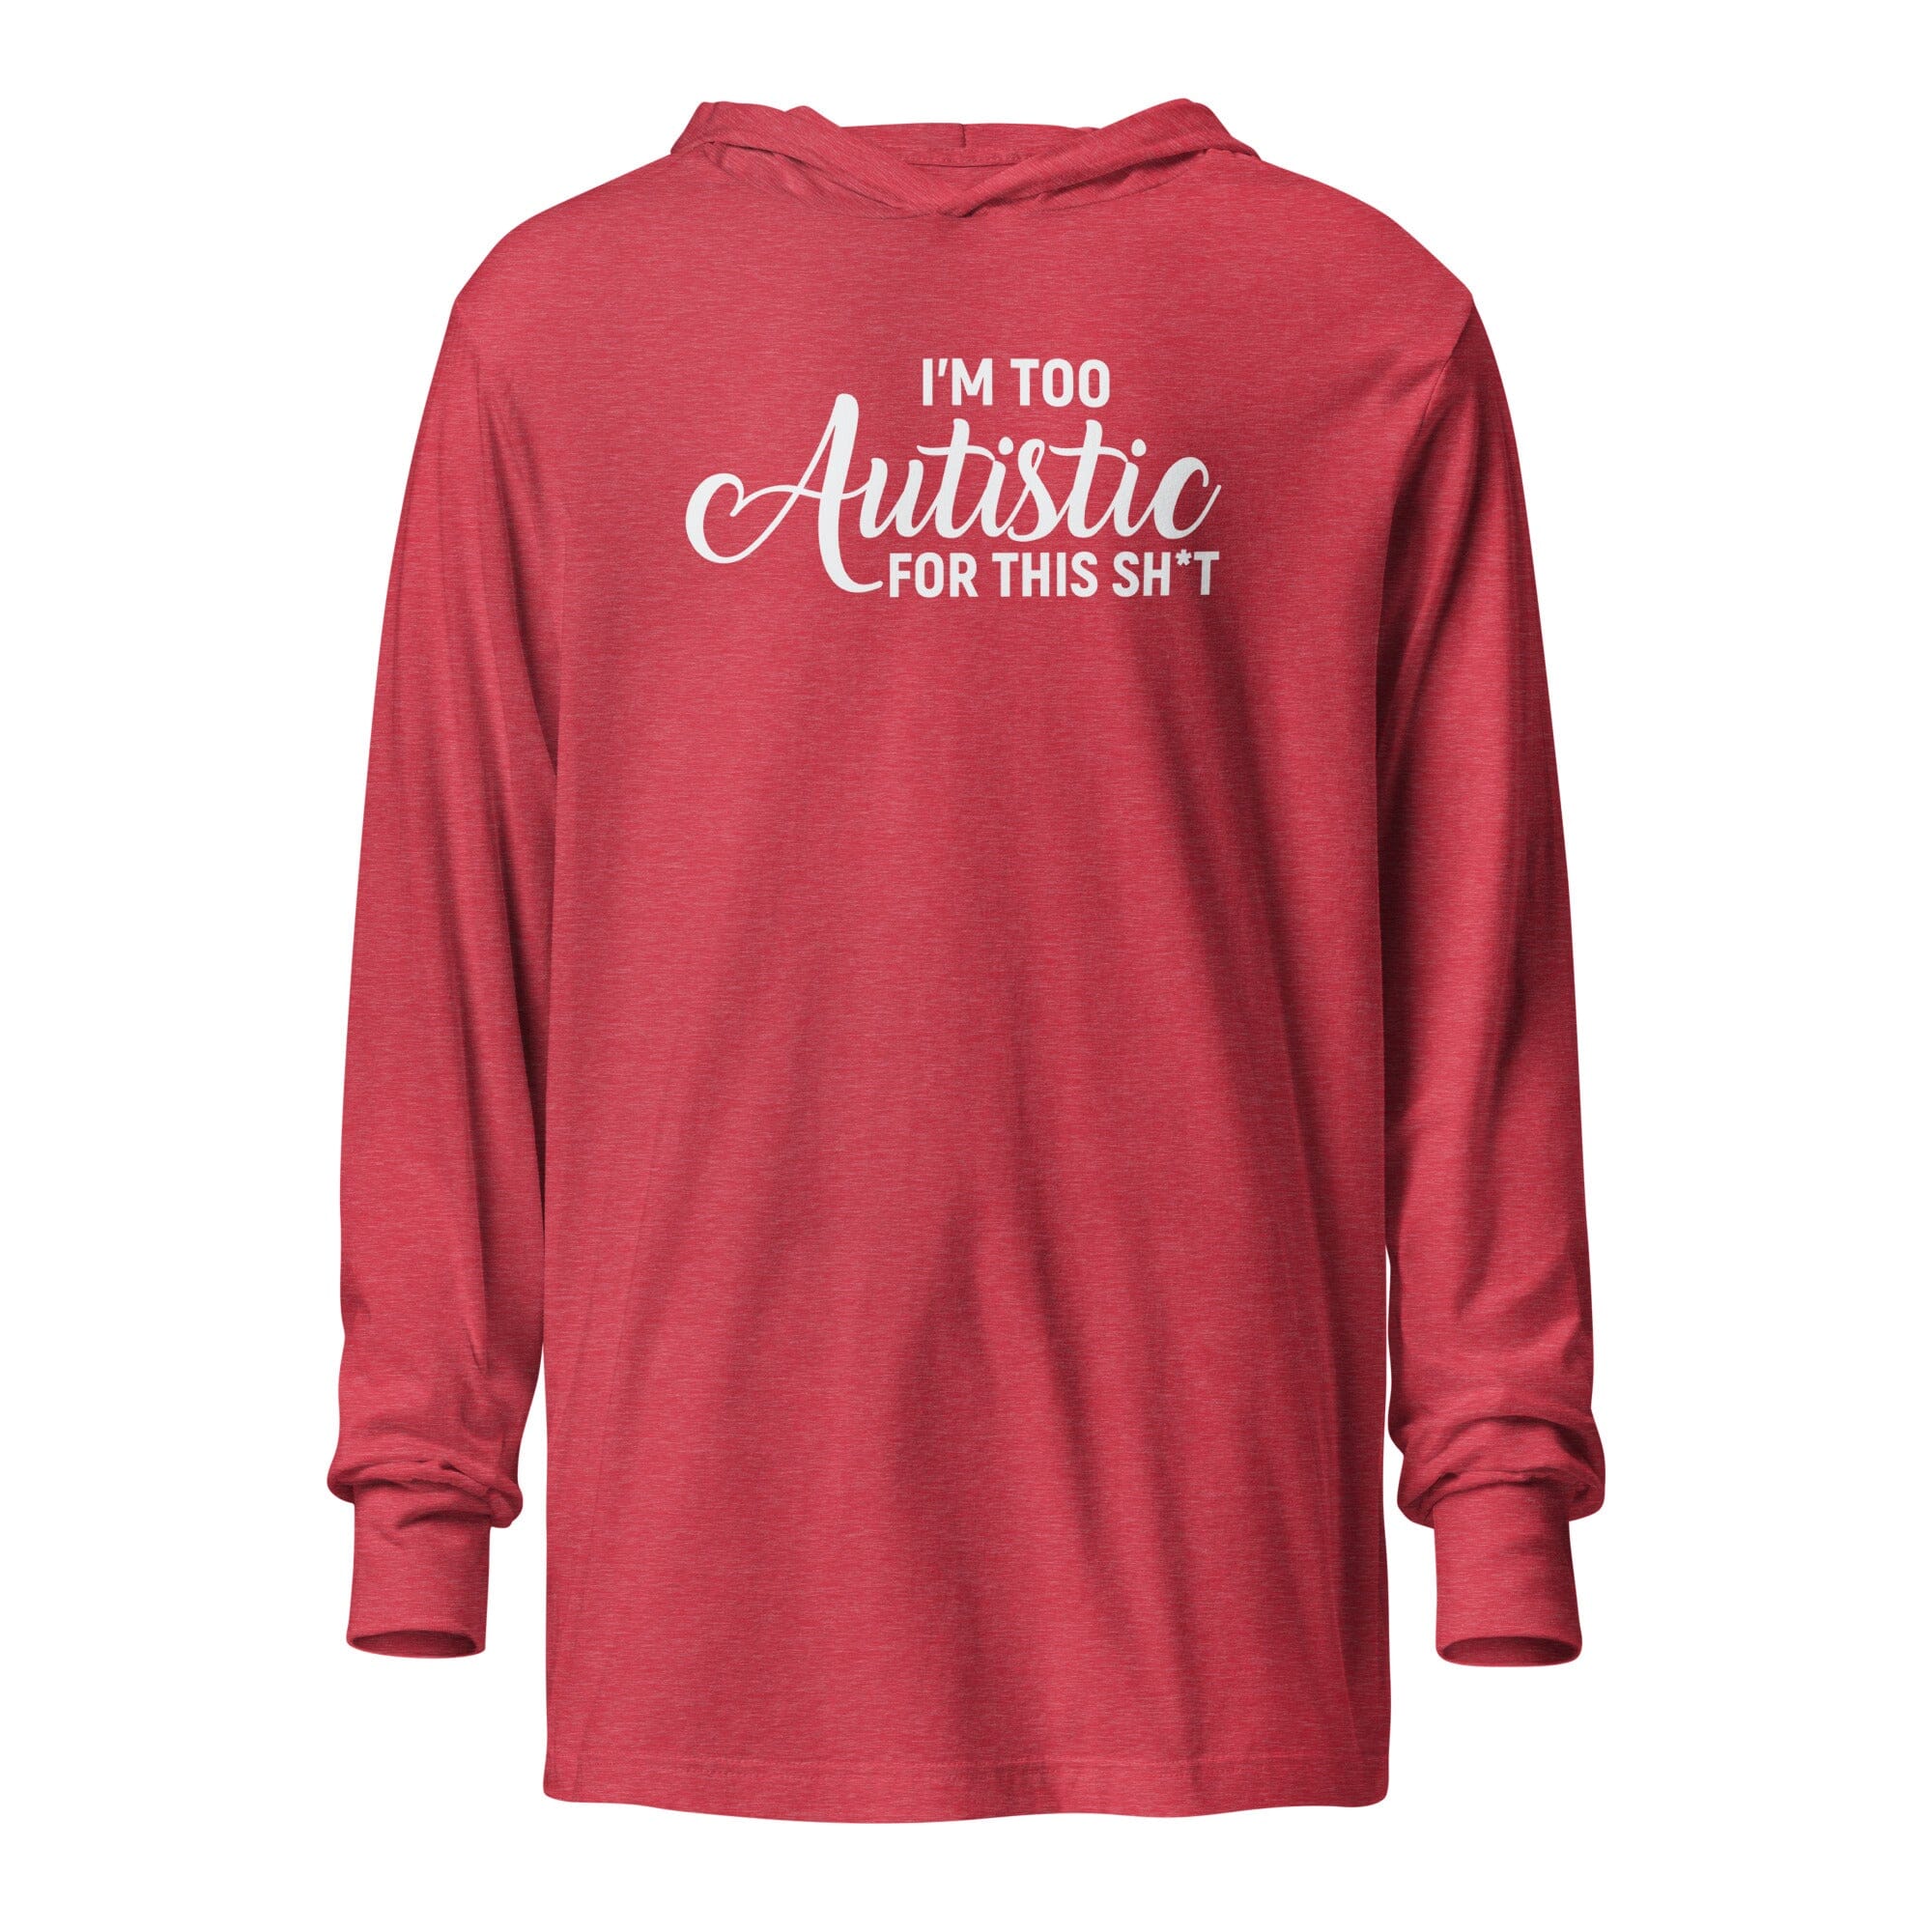 I'm Too Autistic for This Sh*t Hooded long-sleeve tee The Autistic Innovator Heather Red XS 